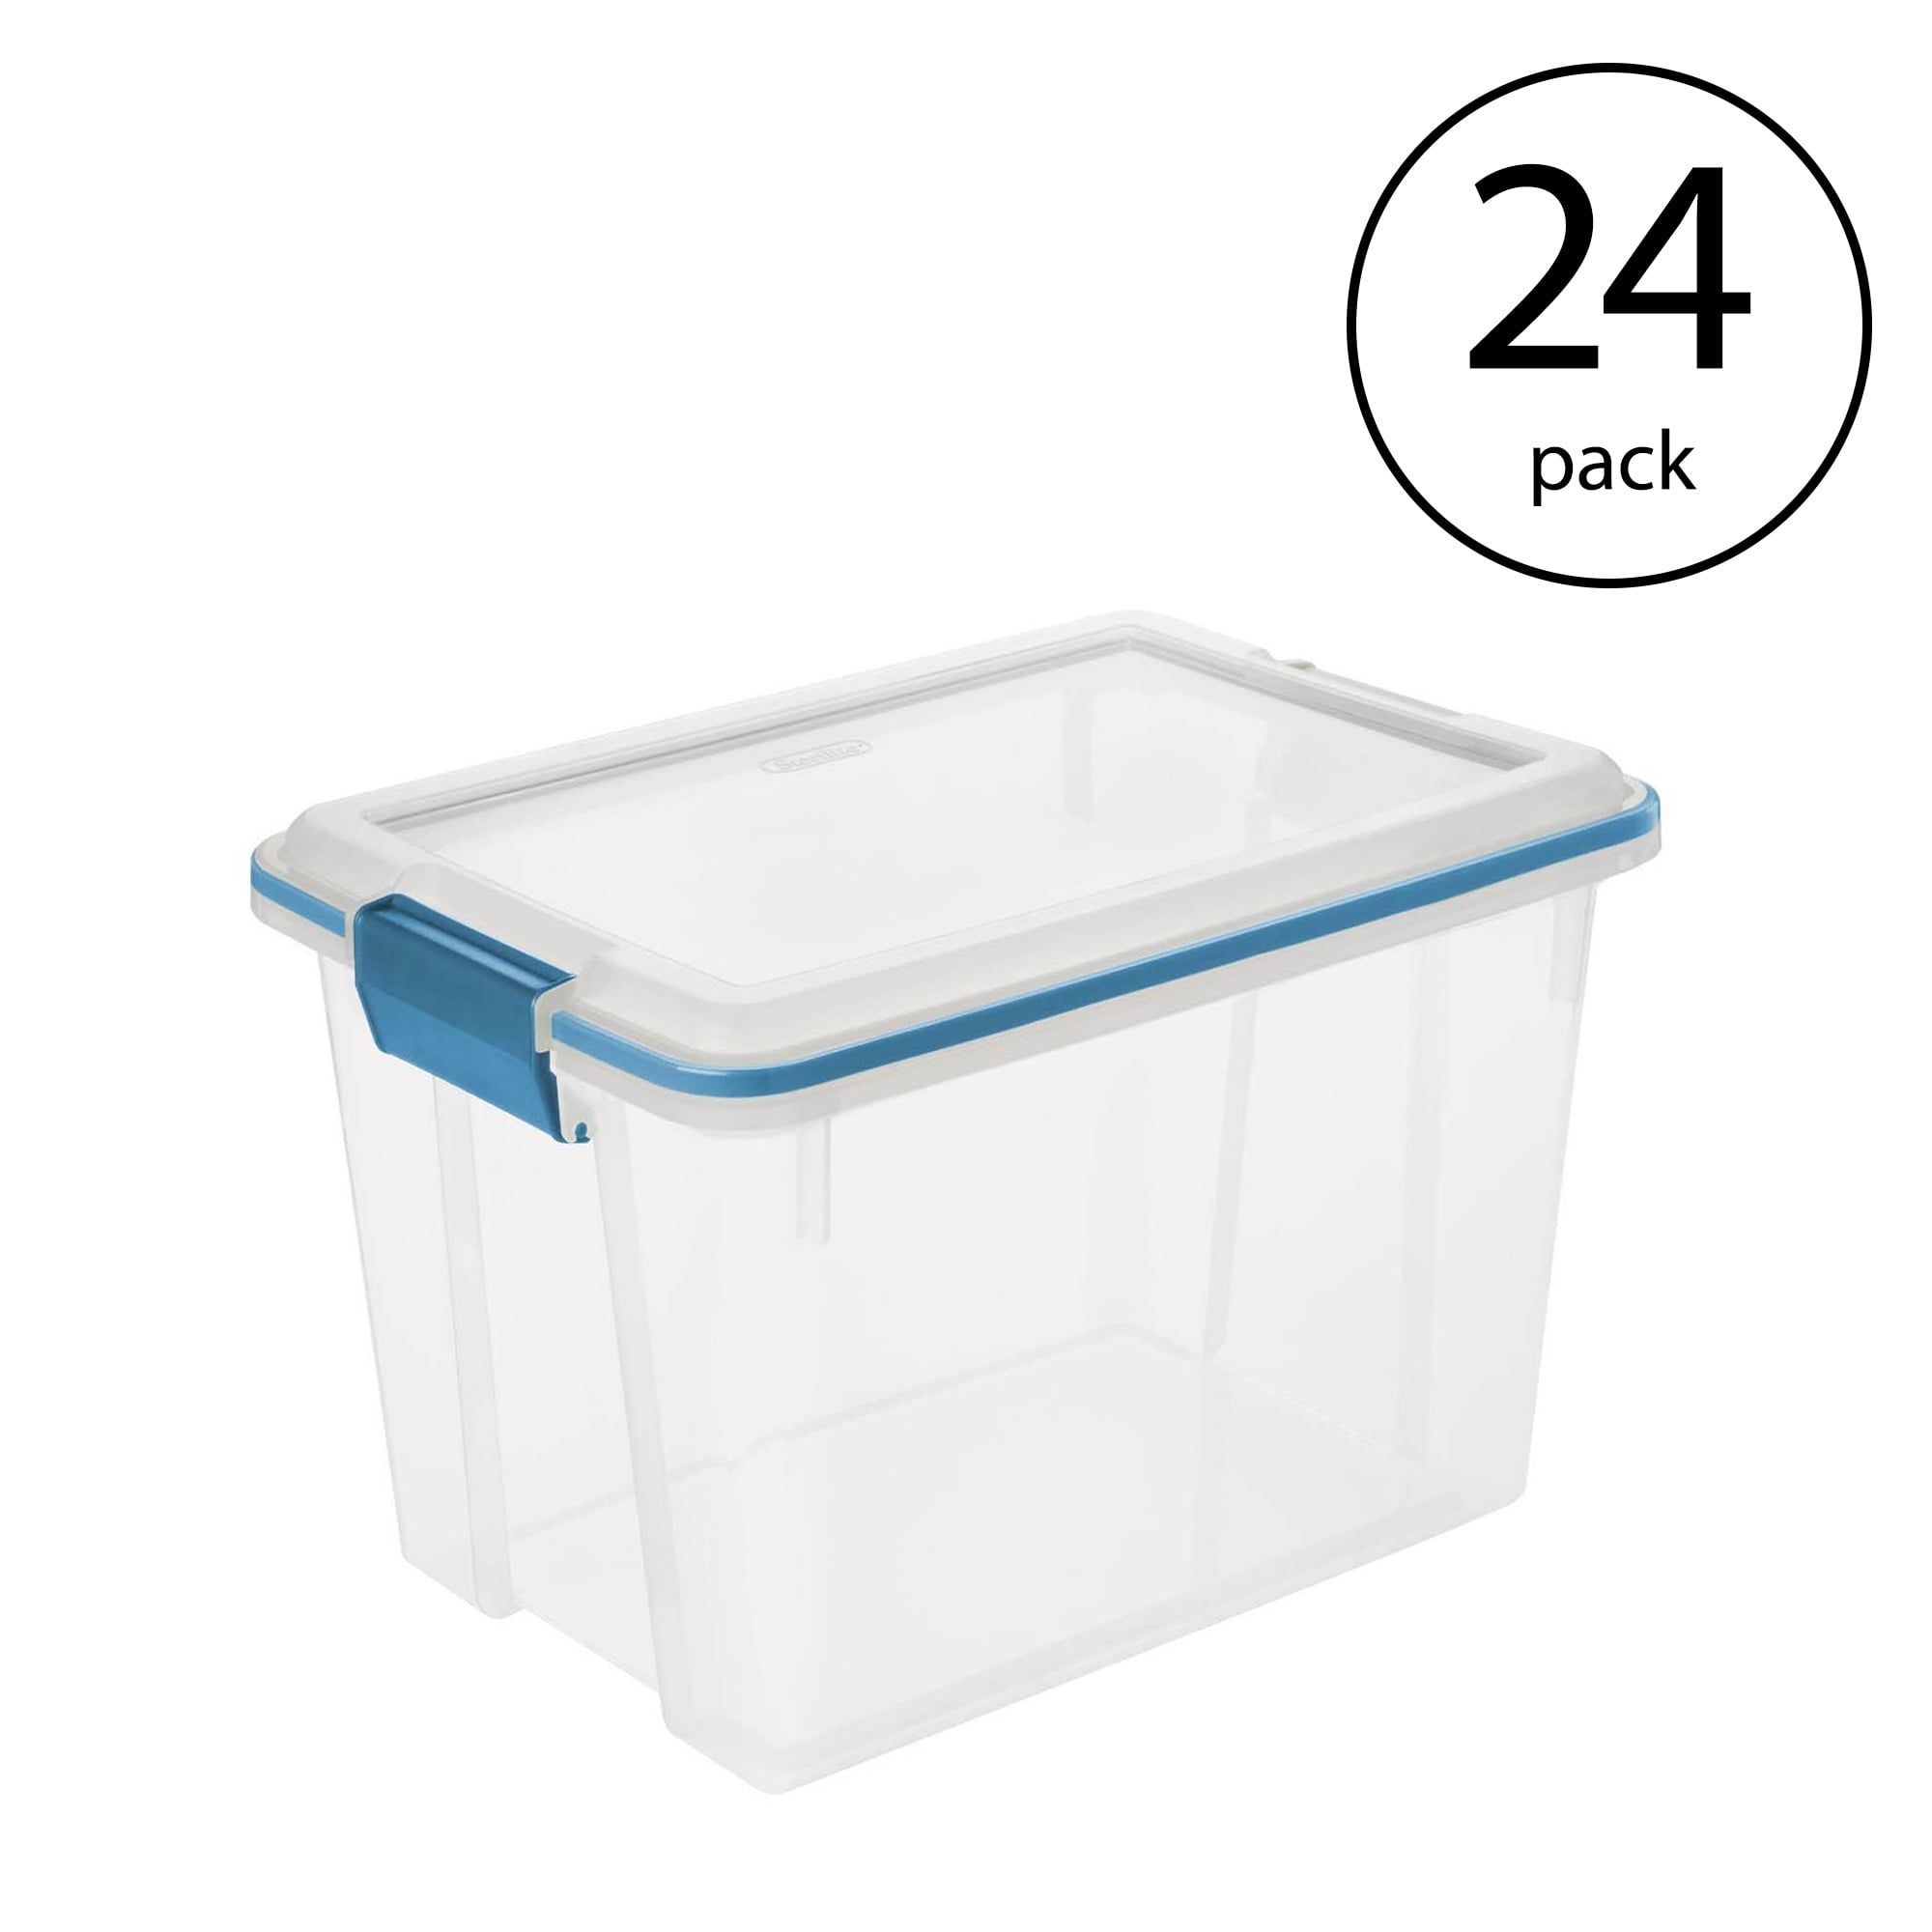 Details about   Storage Box Storing Clothes Blankets Home with Lid Storage Container Organizer 